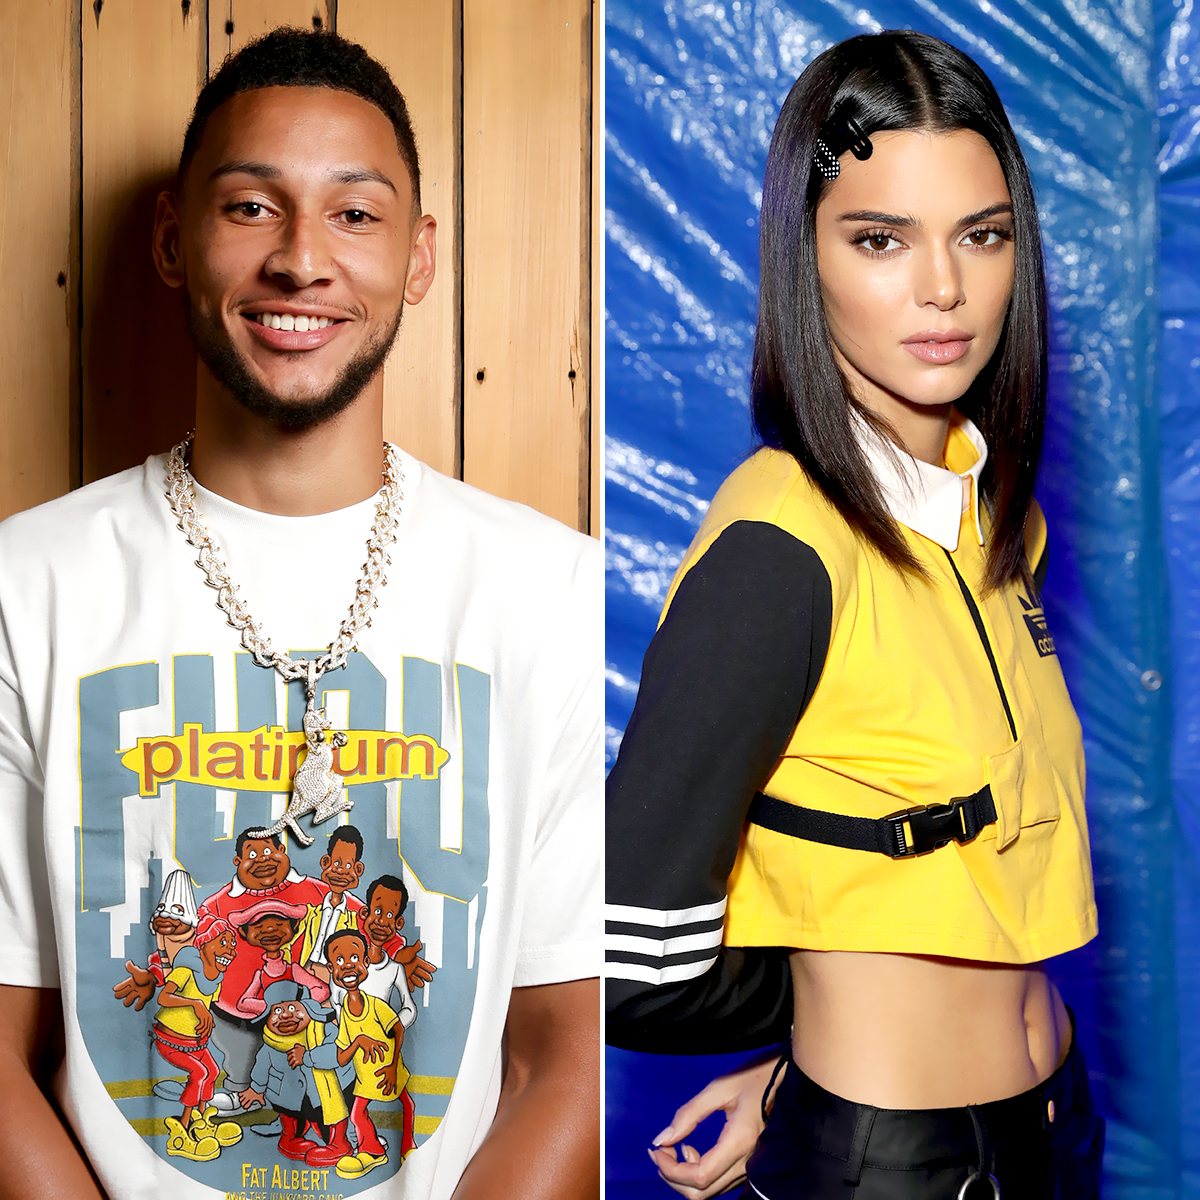 Ben Simmons Sister Seemingly Shades Kendall Jenner Before Deal News